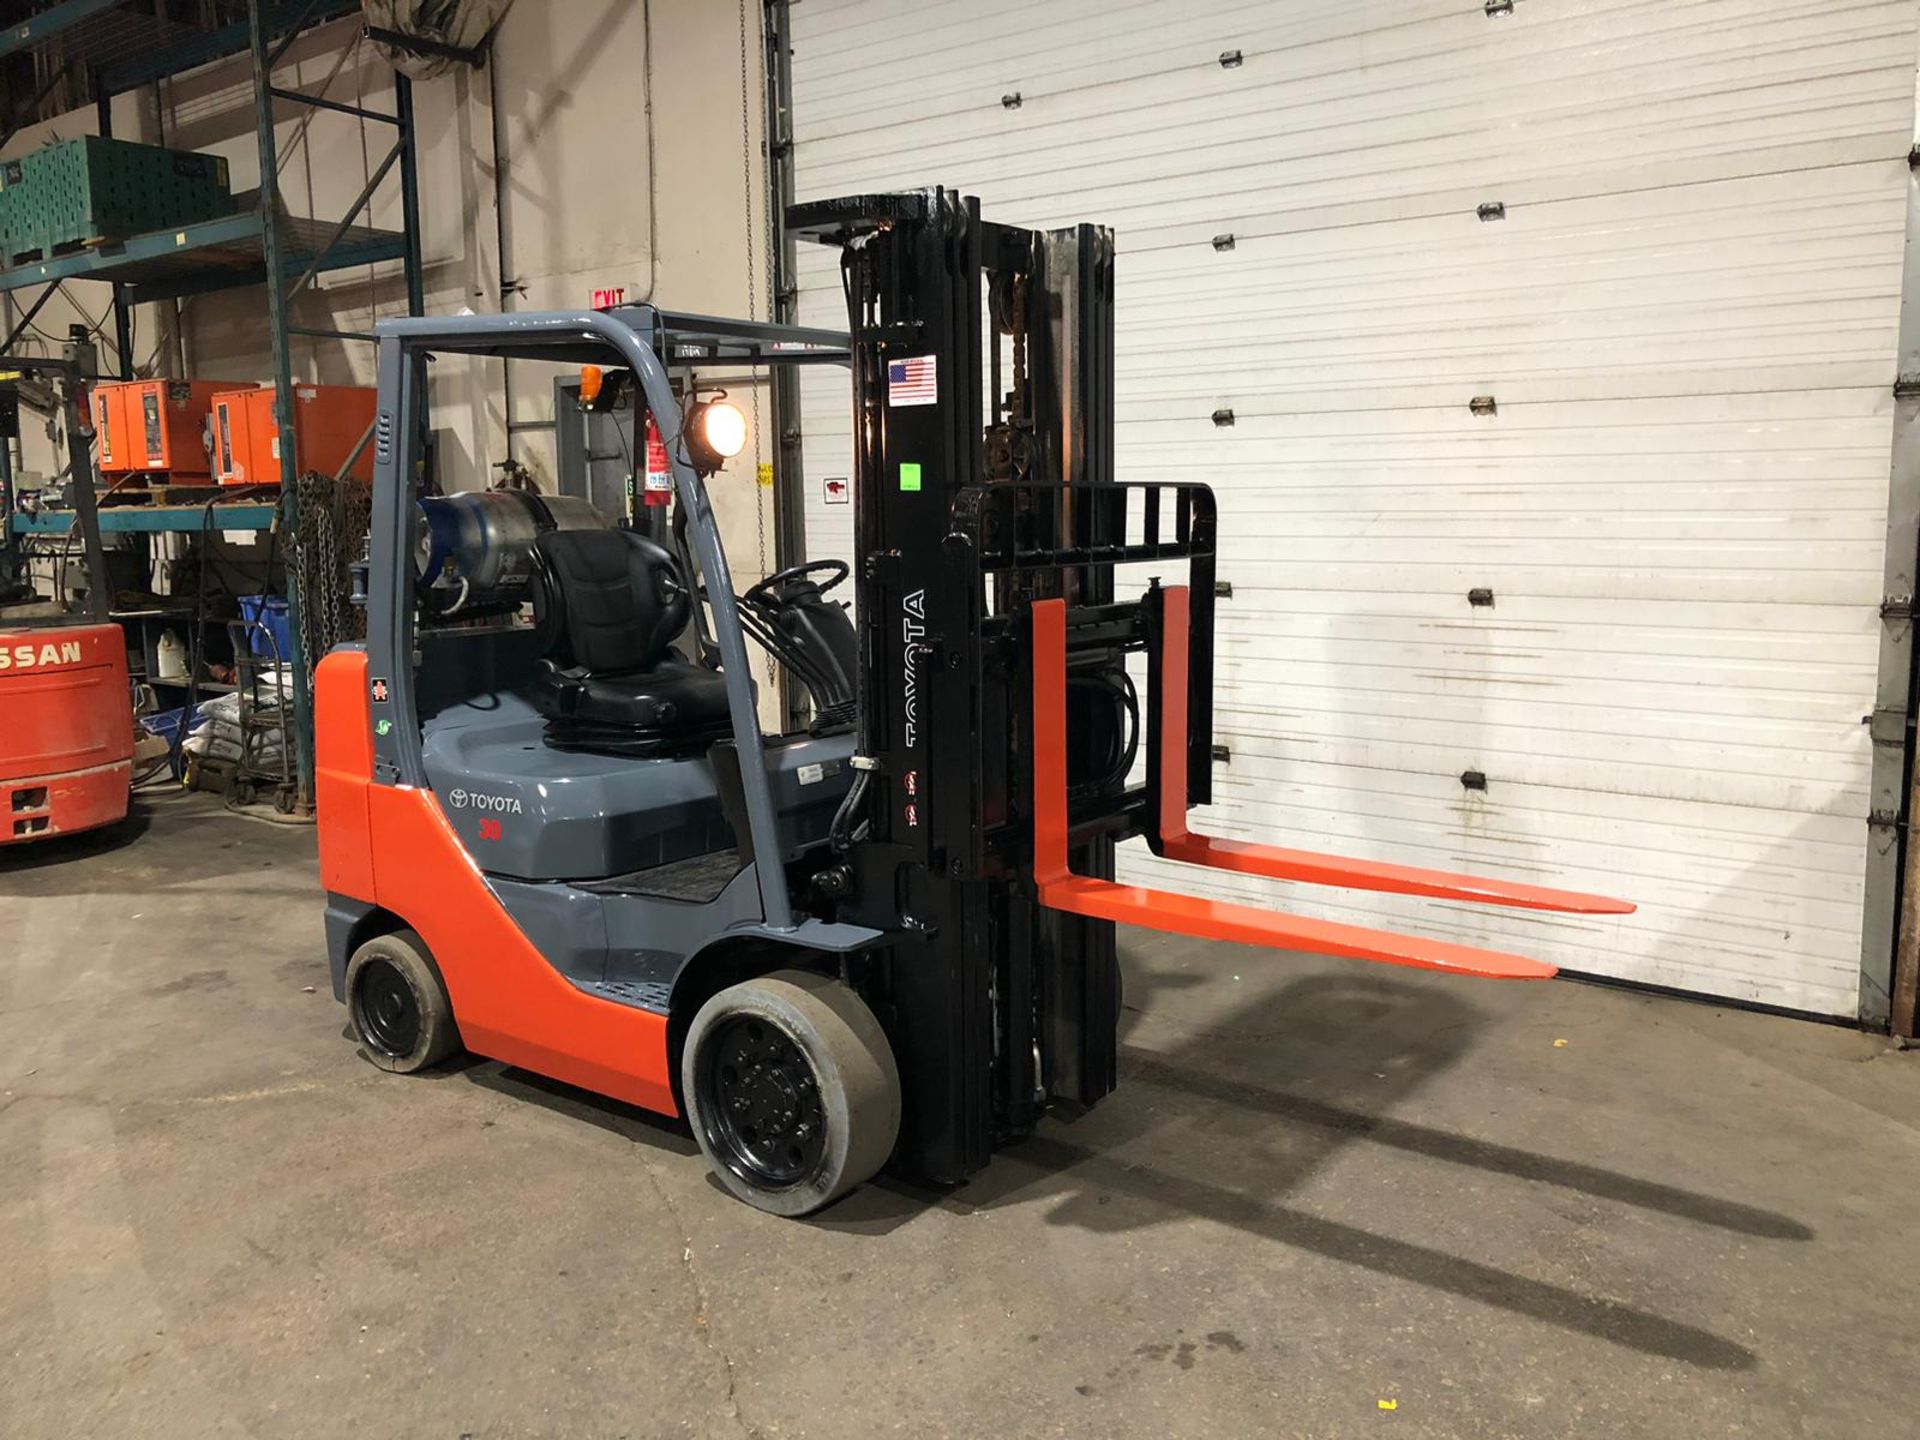 2012 Toyota 6,000lbs Capacity LPG (Propane) Forklift with sideshift and 3-STAGE MAST (no propane - Image 5 of 5